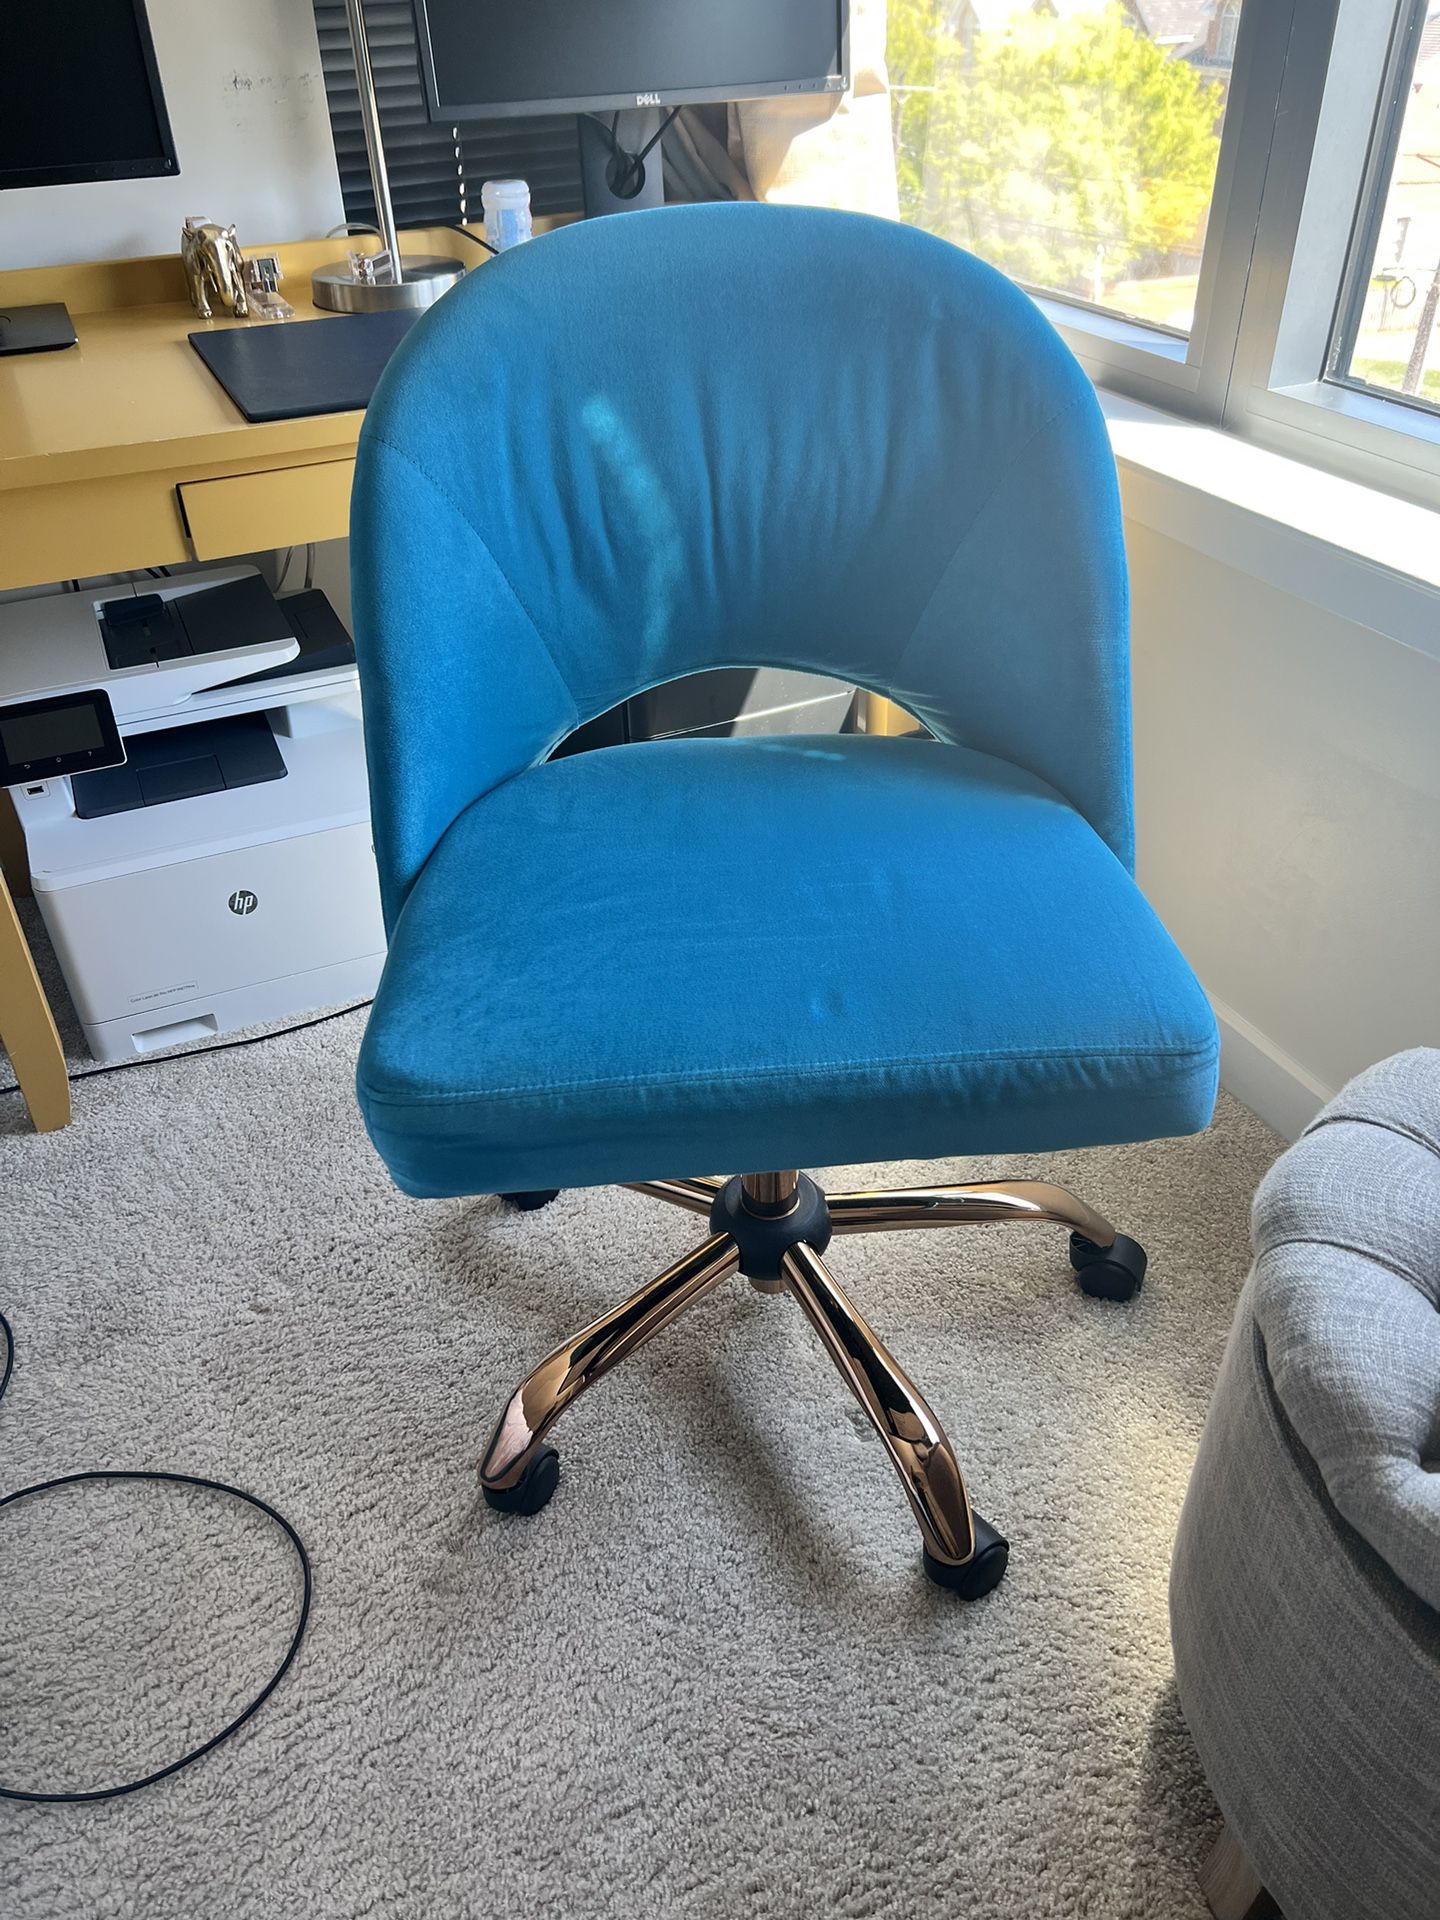 PRICE DROP! Beautiful Suede Turquoise Desk Chair! (Barely Used) 